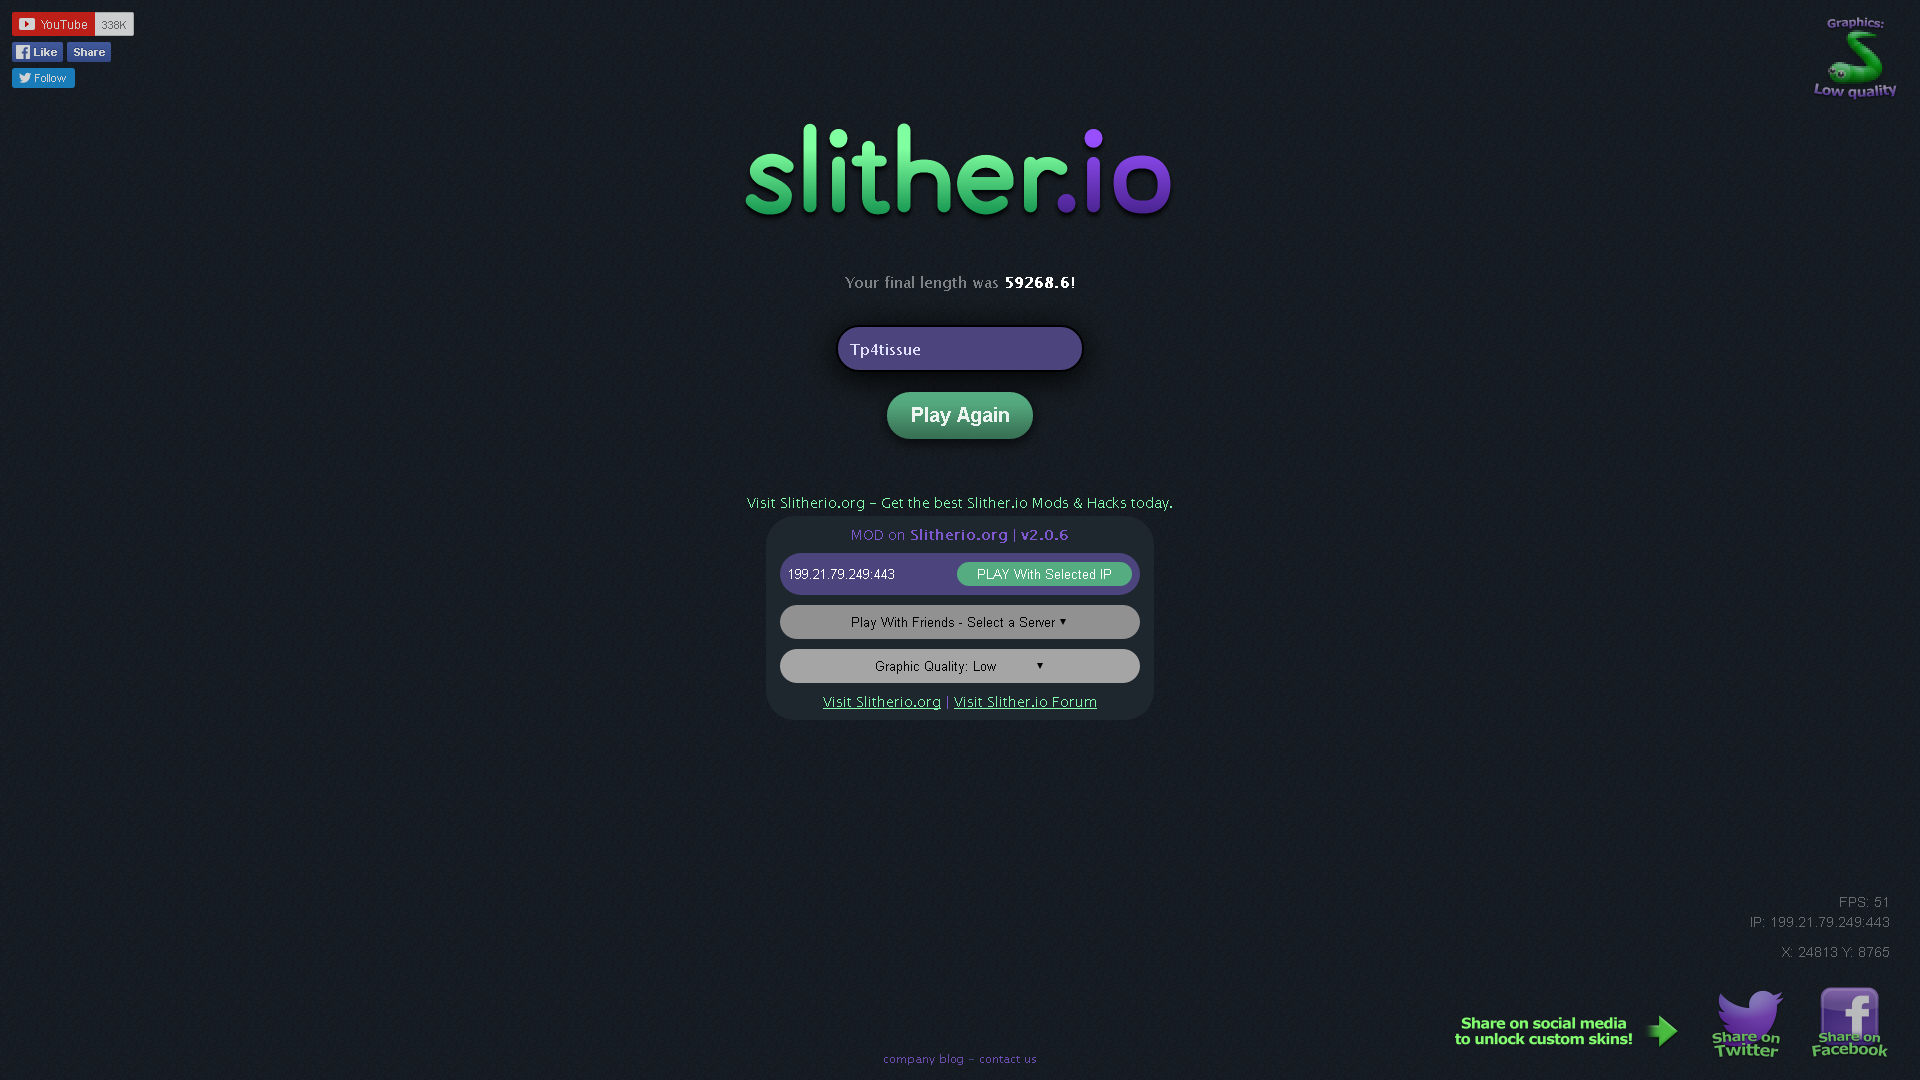 Slither.io Play Friends Mod - Slither.io Hack and Slitherio Mods